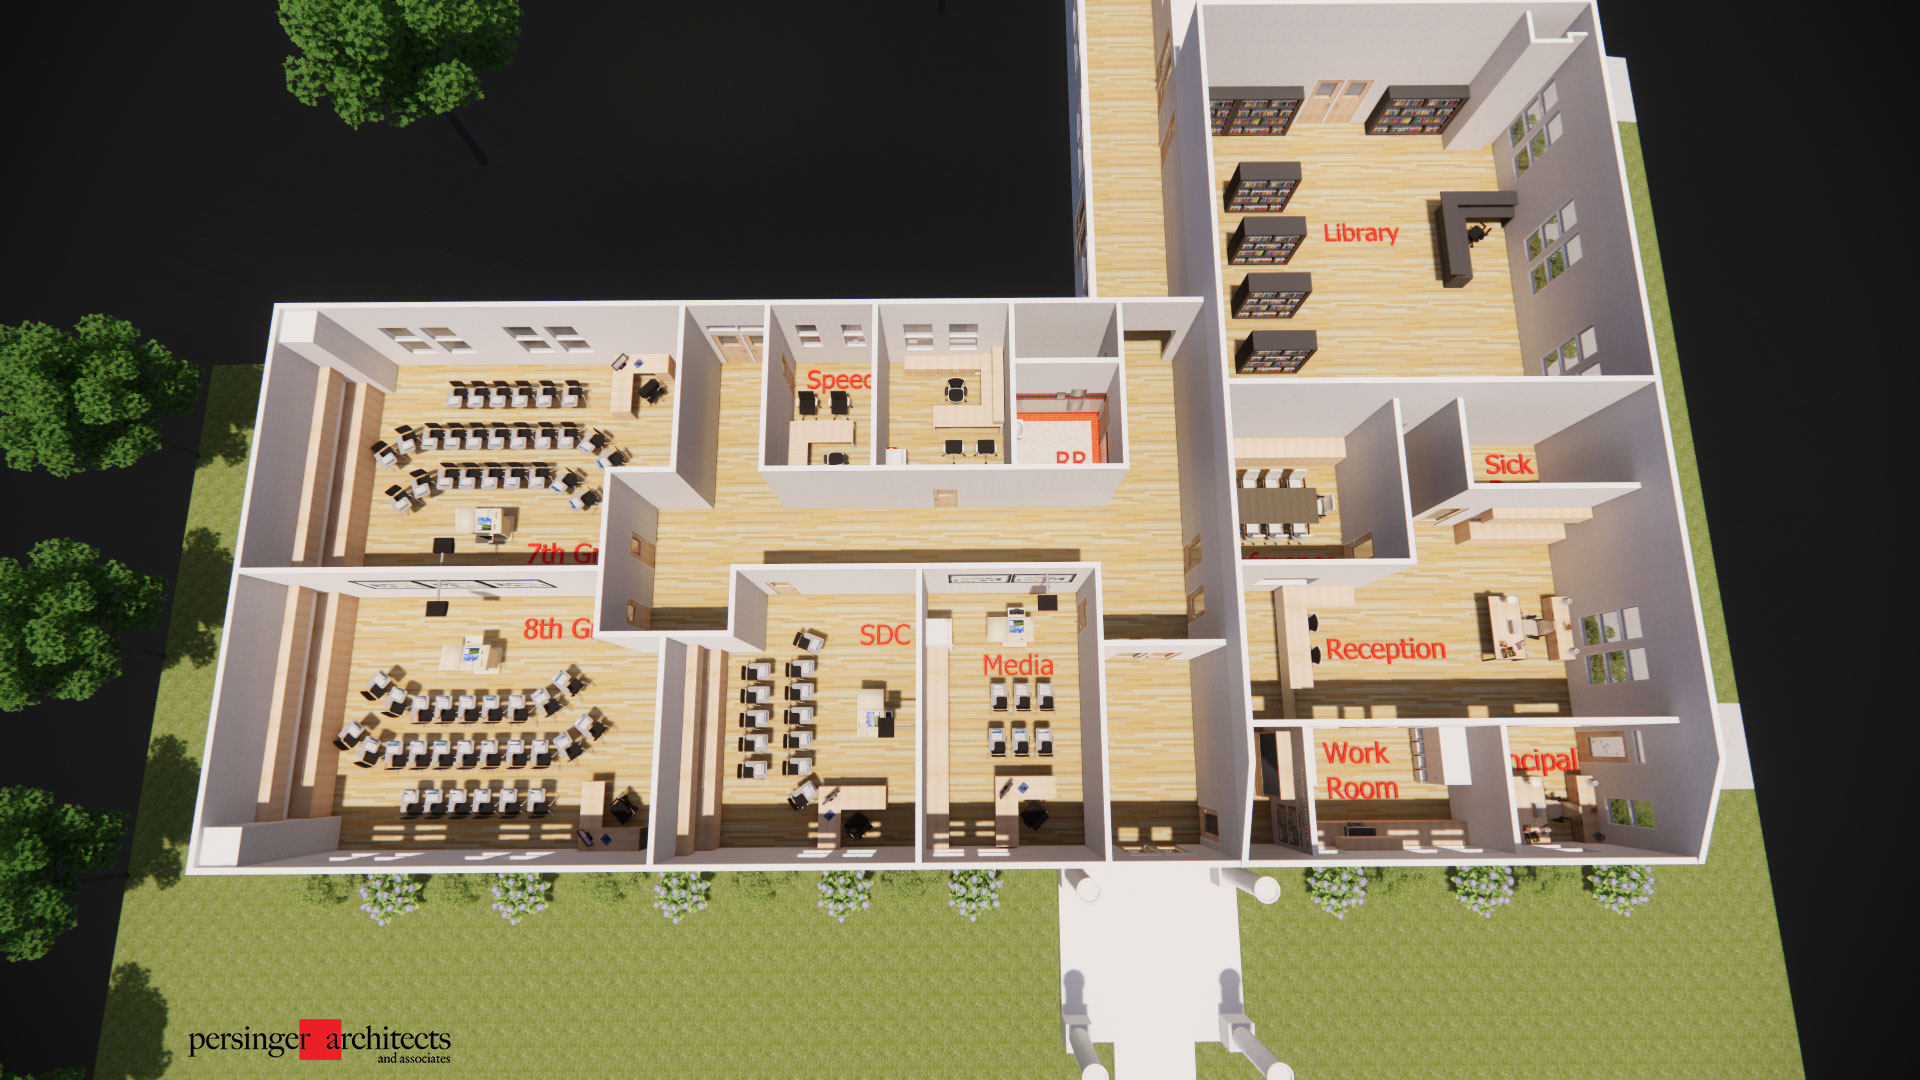 Rendering of floorplan, showing Administration, Restrooms, Library, Classrooms, and more.